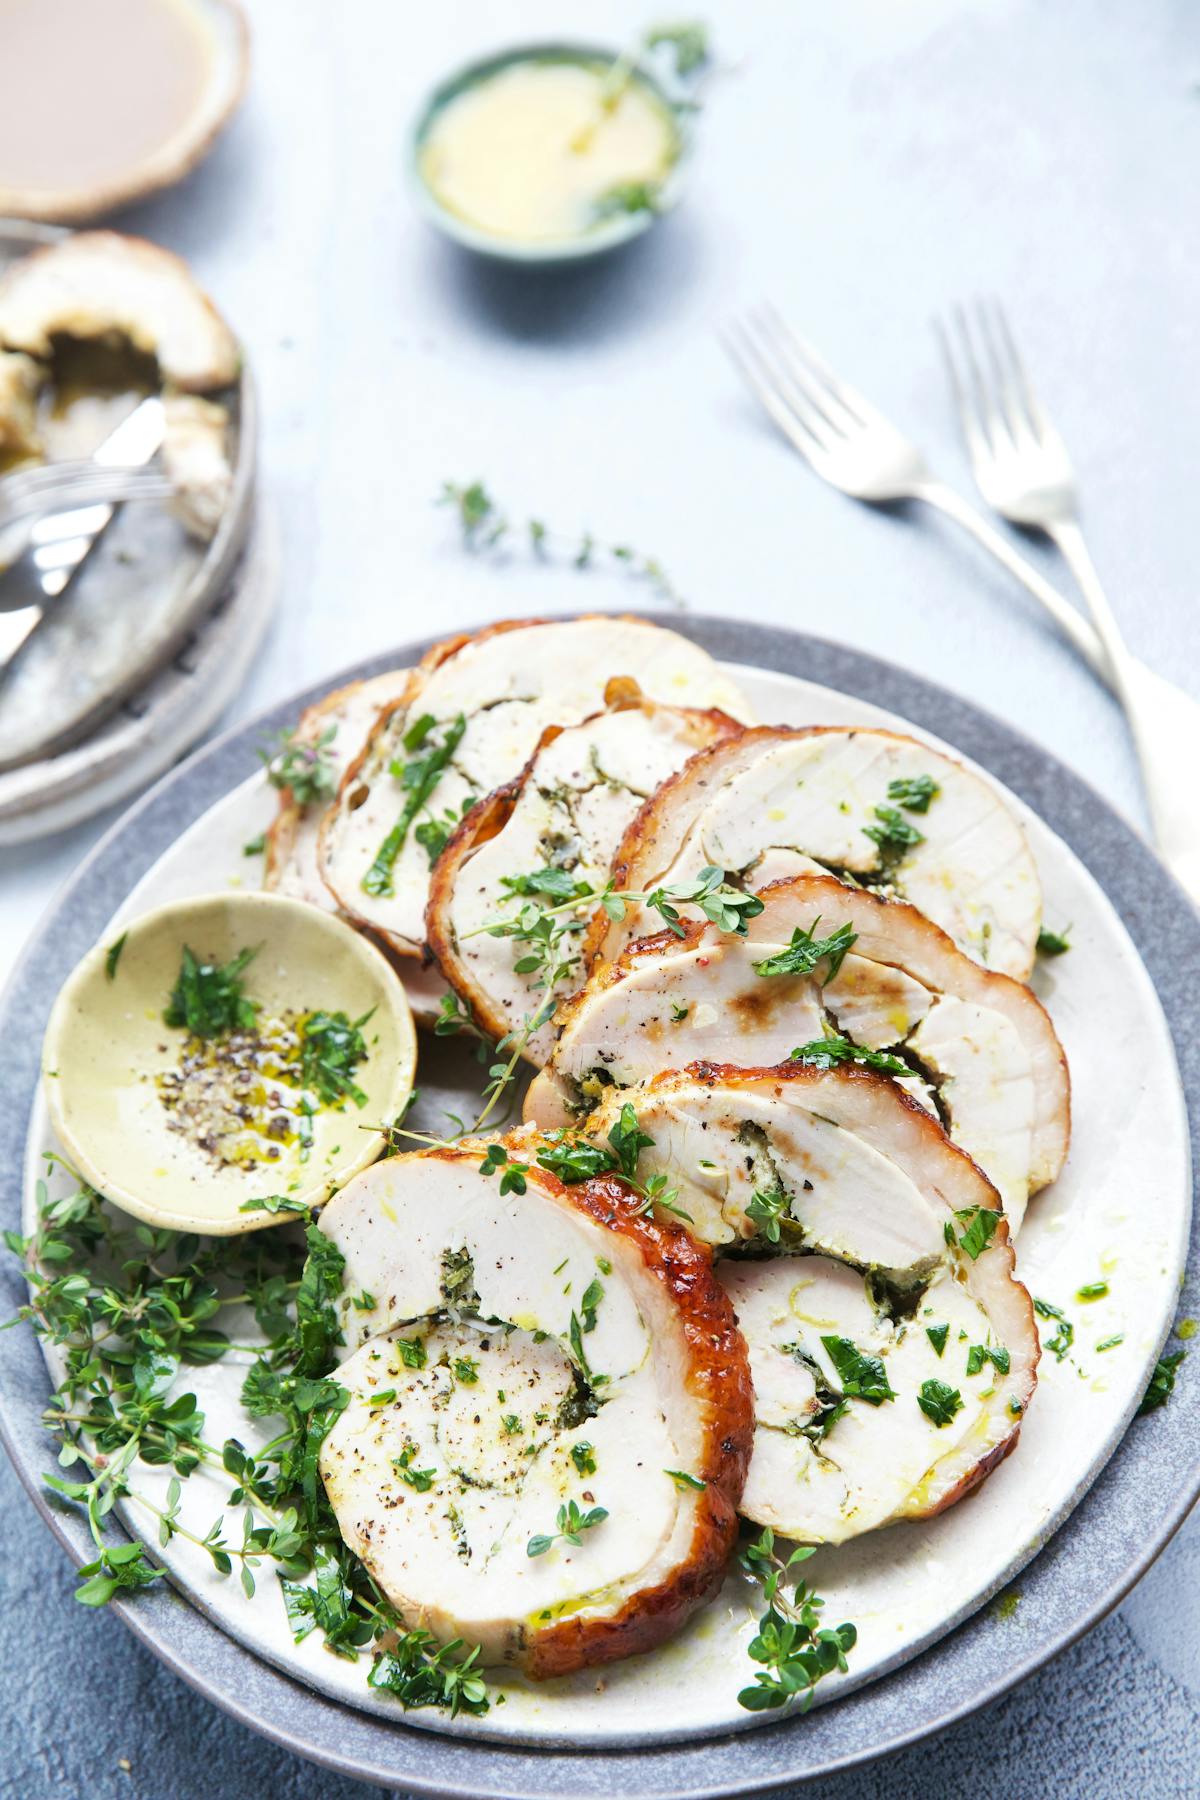 Roast turkey roulade with herbs